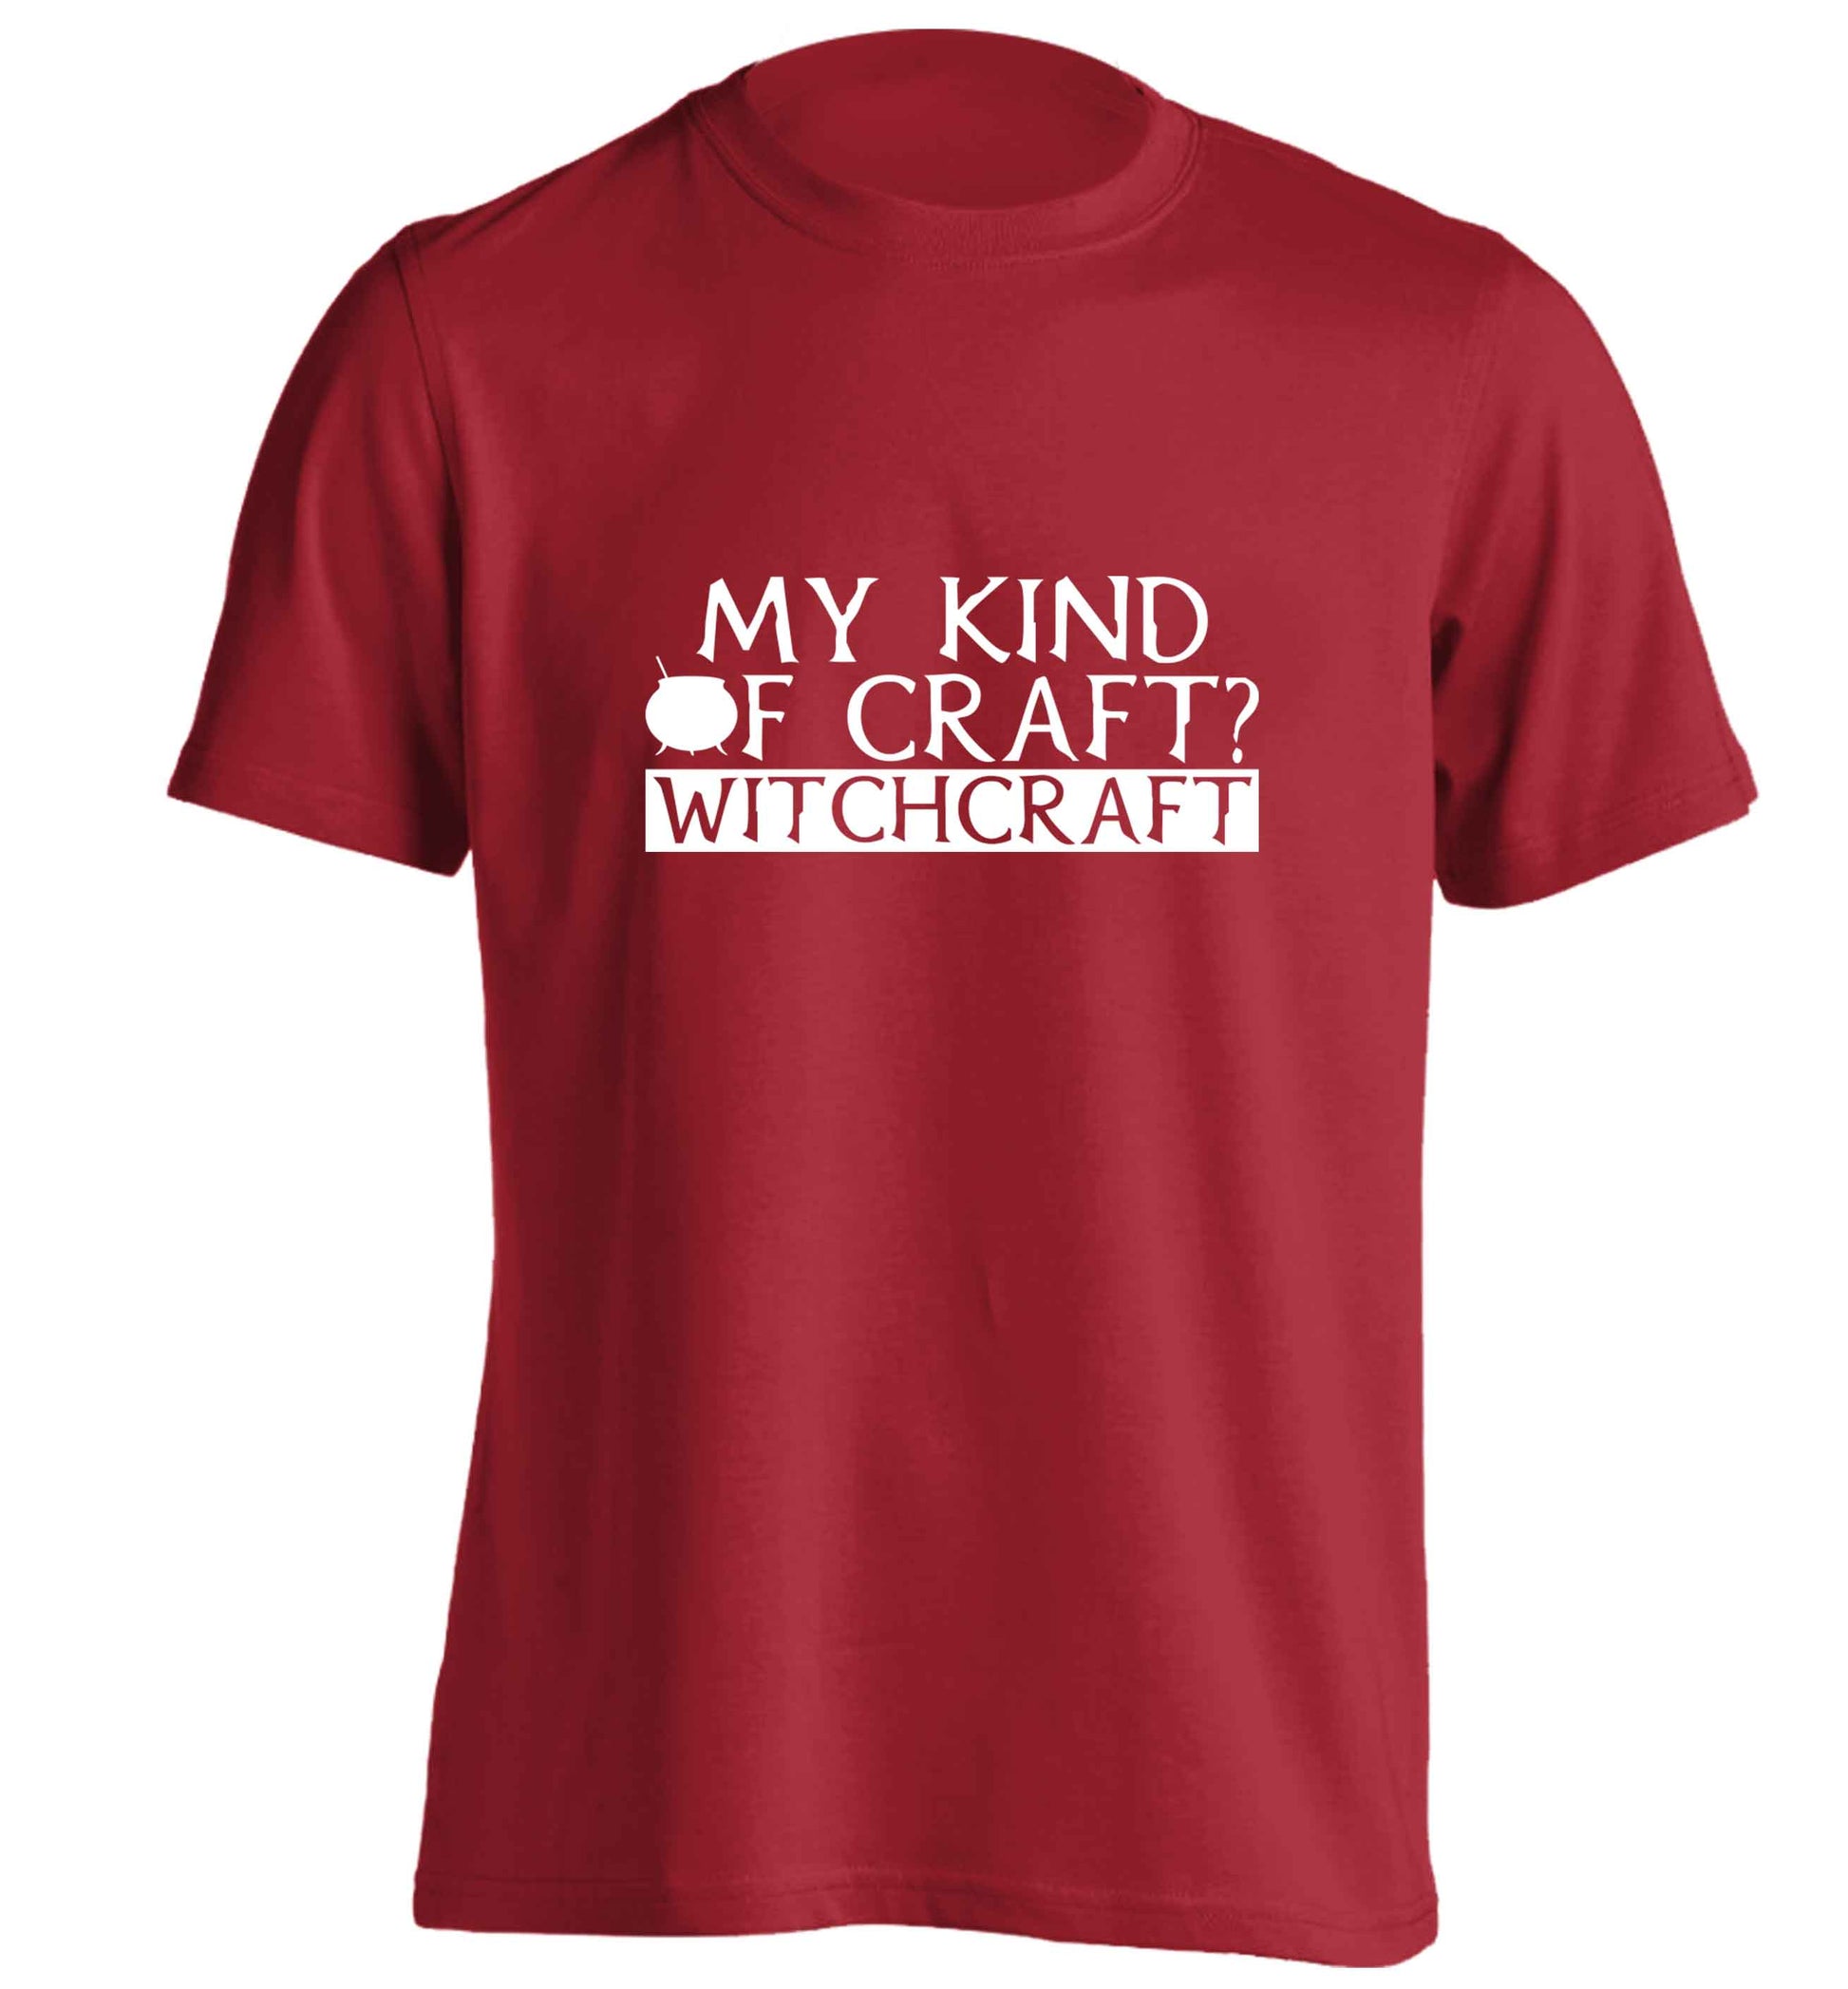 My king of craft? witchcraft  adults unisex red Tshirt 2XL